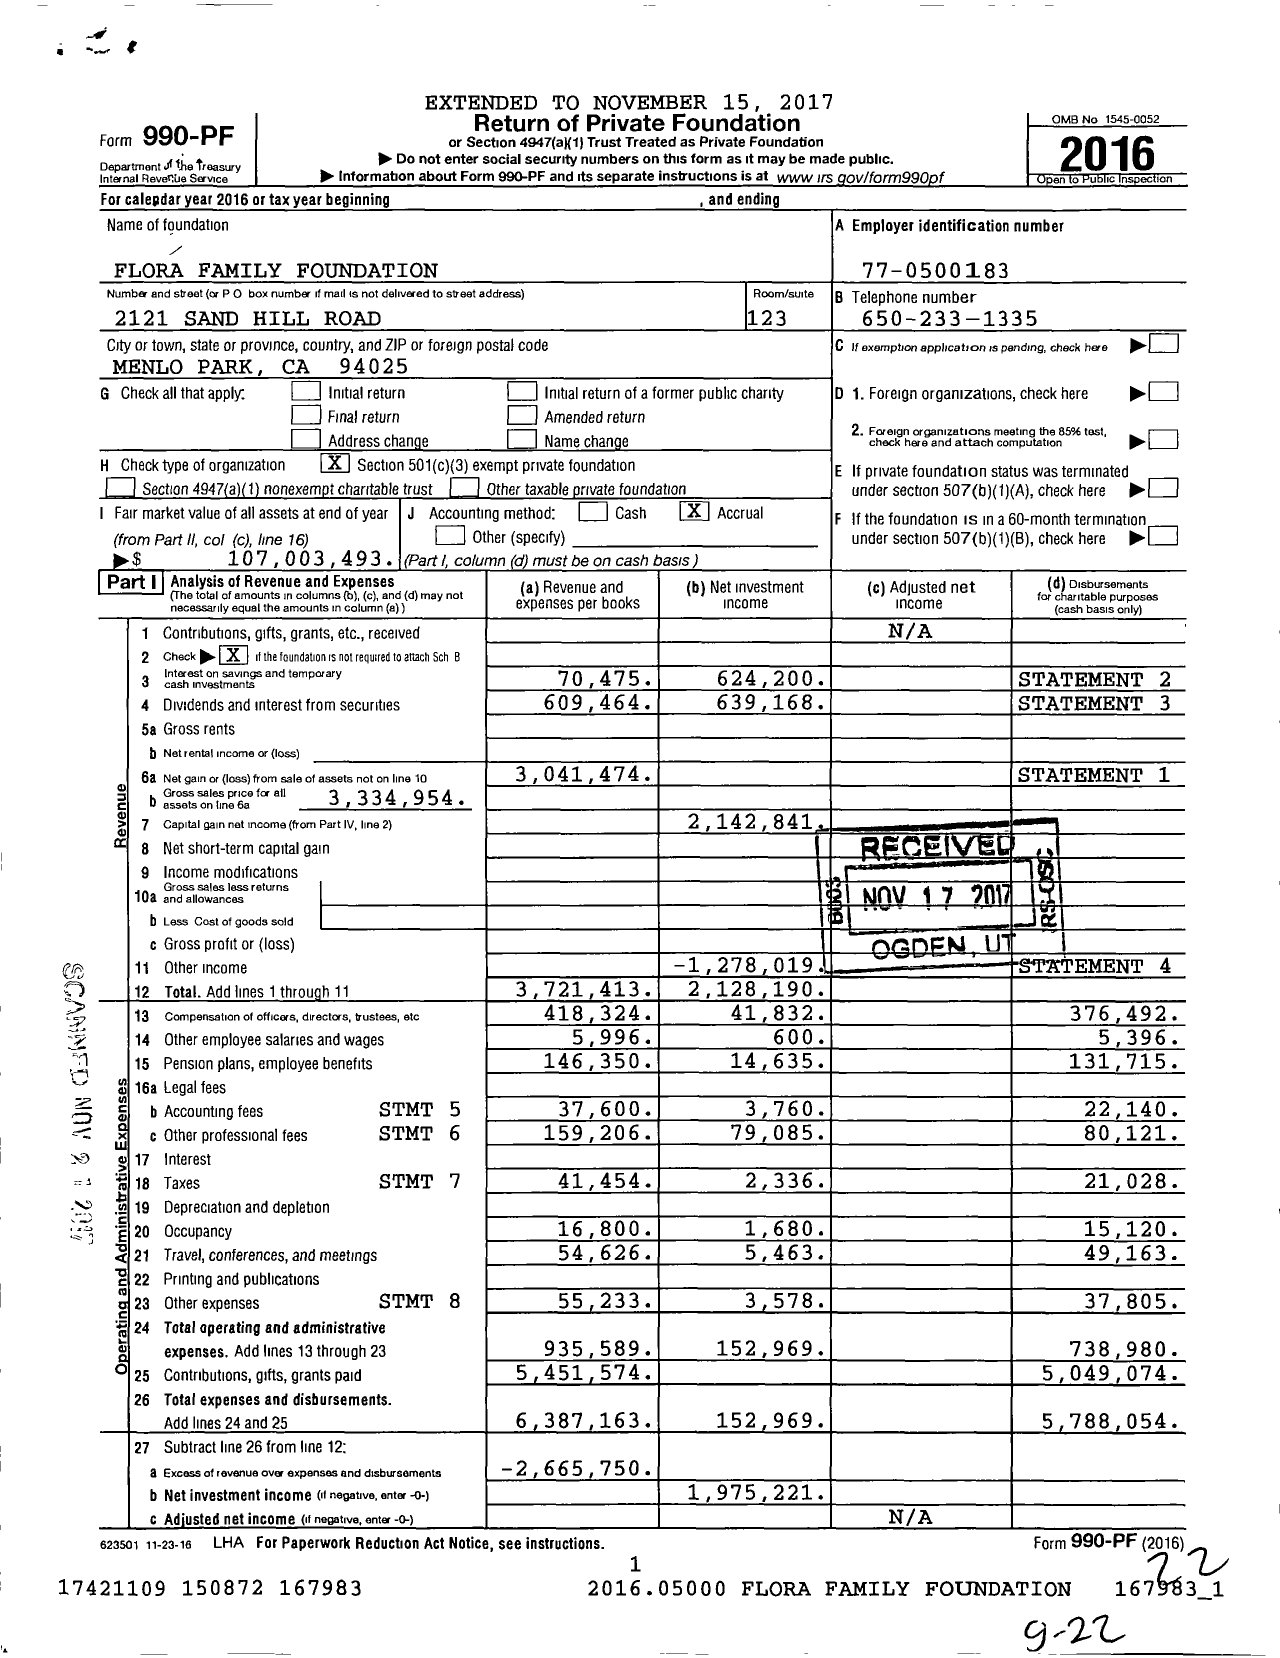 Image of first page of 2016 Form 990PF for Flora Family Foundation (FFF)